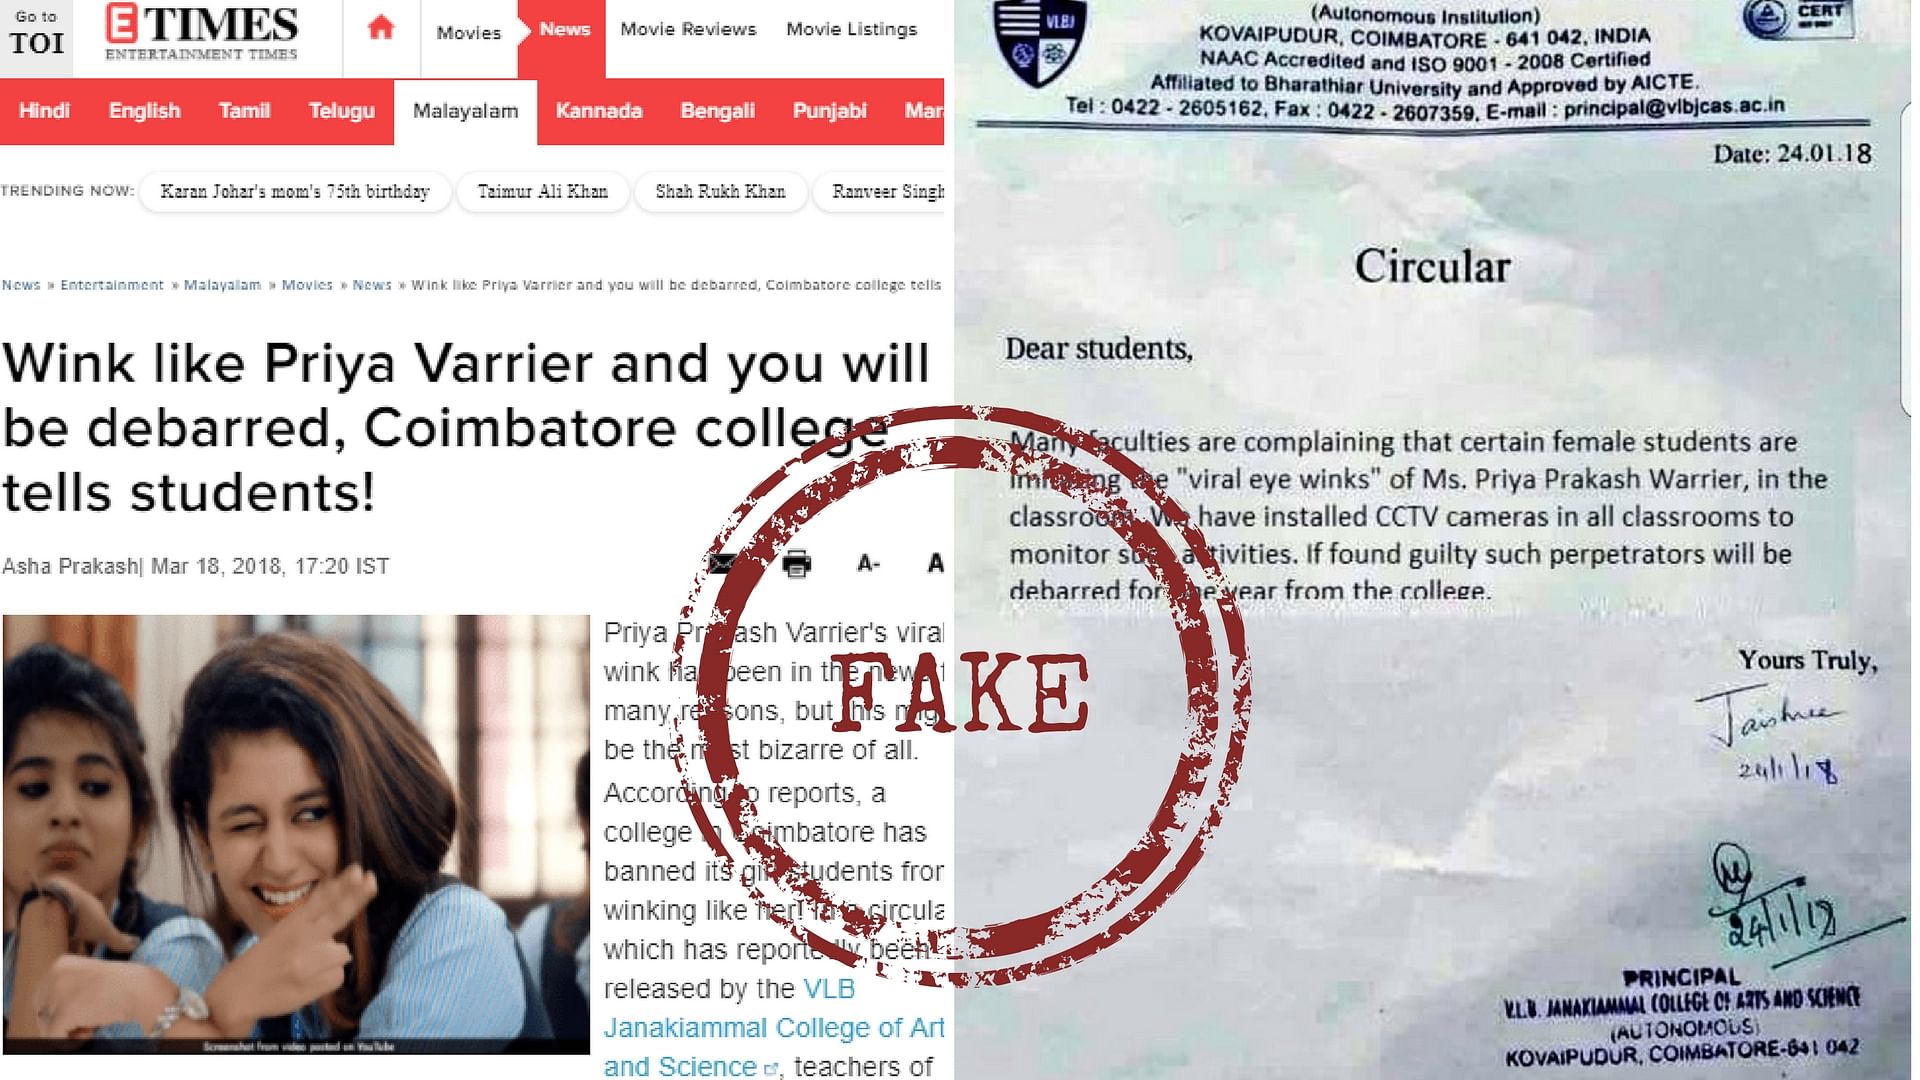 The fake circular of a college from Coimbatore went viral on social media.